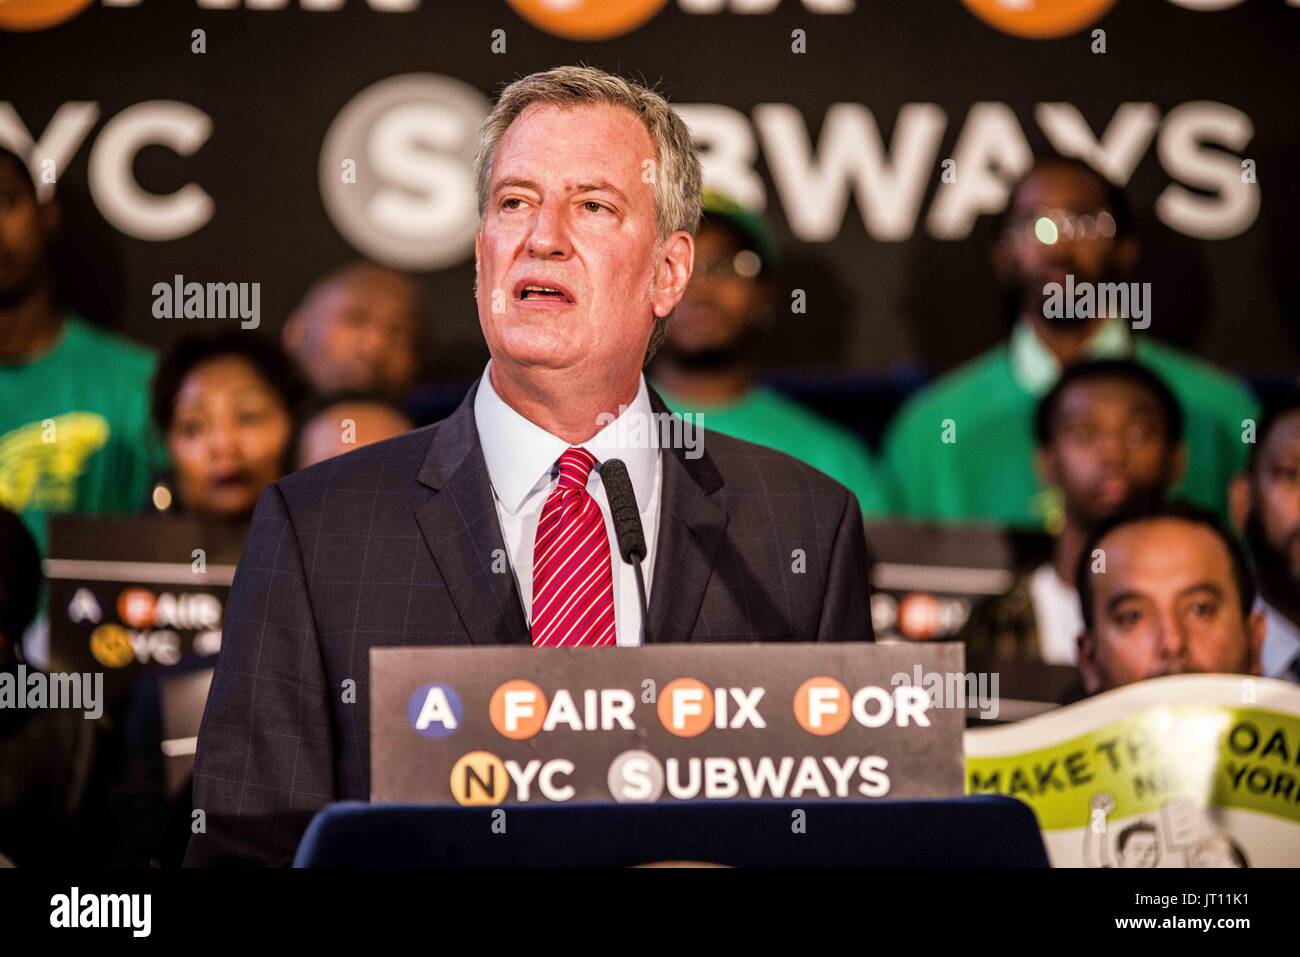 New York City, New York, USA. 7th Aug, 2017. (photo: Sachelle Babbar) At City Hall on Monday Mayor de Blasio announced a bill to impose a tax on the wealthiest New Yorkers in order to finance the long-overdue repairs, upgrades, and general maintenance of the NYC subway system. As of late, the subway system has been plagued with delays and accidents, including a June subway derailment that injured dozens. The derailment was due to the storage of loose items by MTA personnel on the tracks. Credit: ZUMA Press, Inc./Alamy Live News Stock Photo